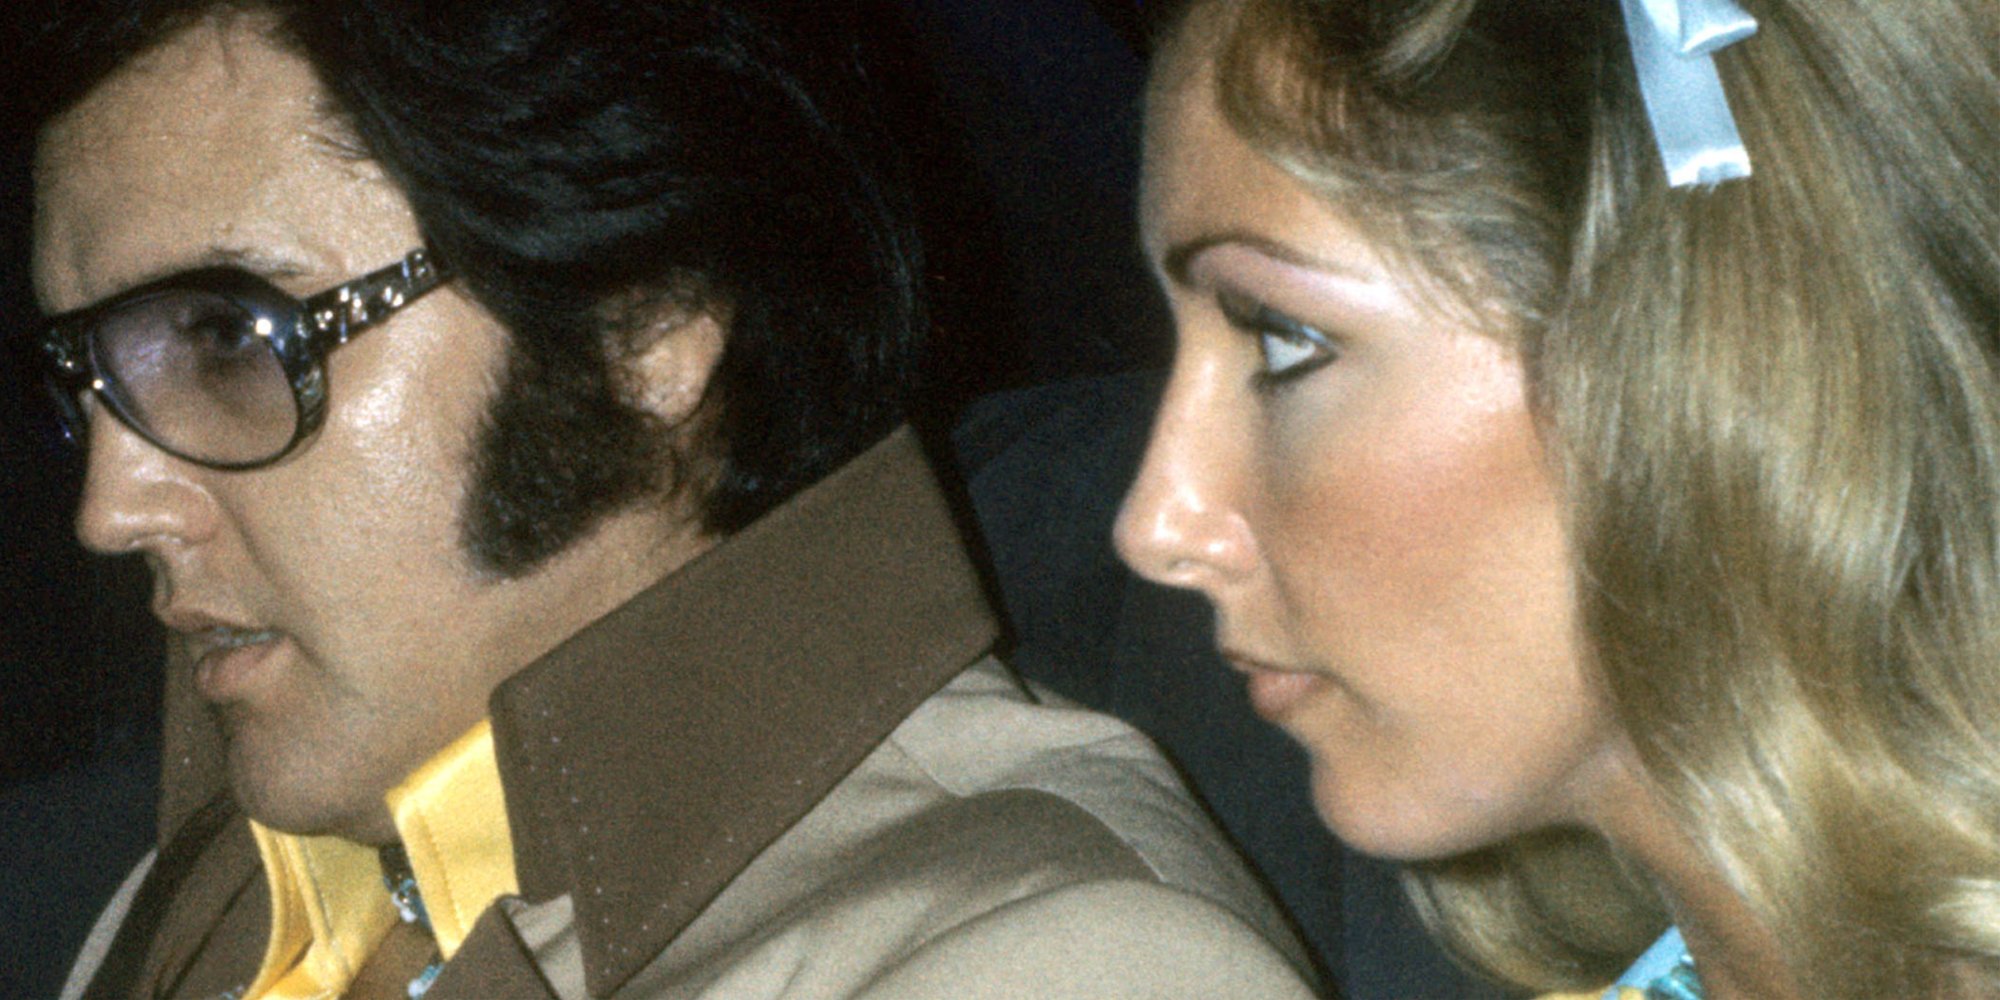 Elvis Presley and Linda Thompson are photographed in a car in 1976.